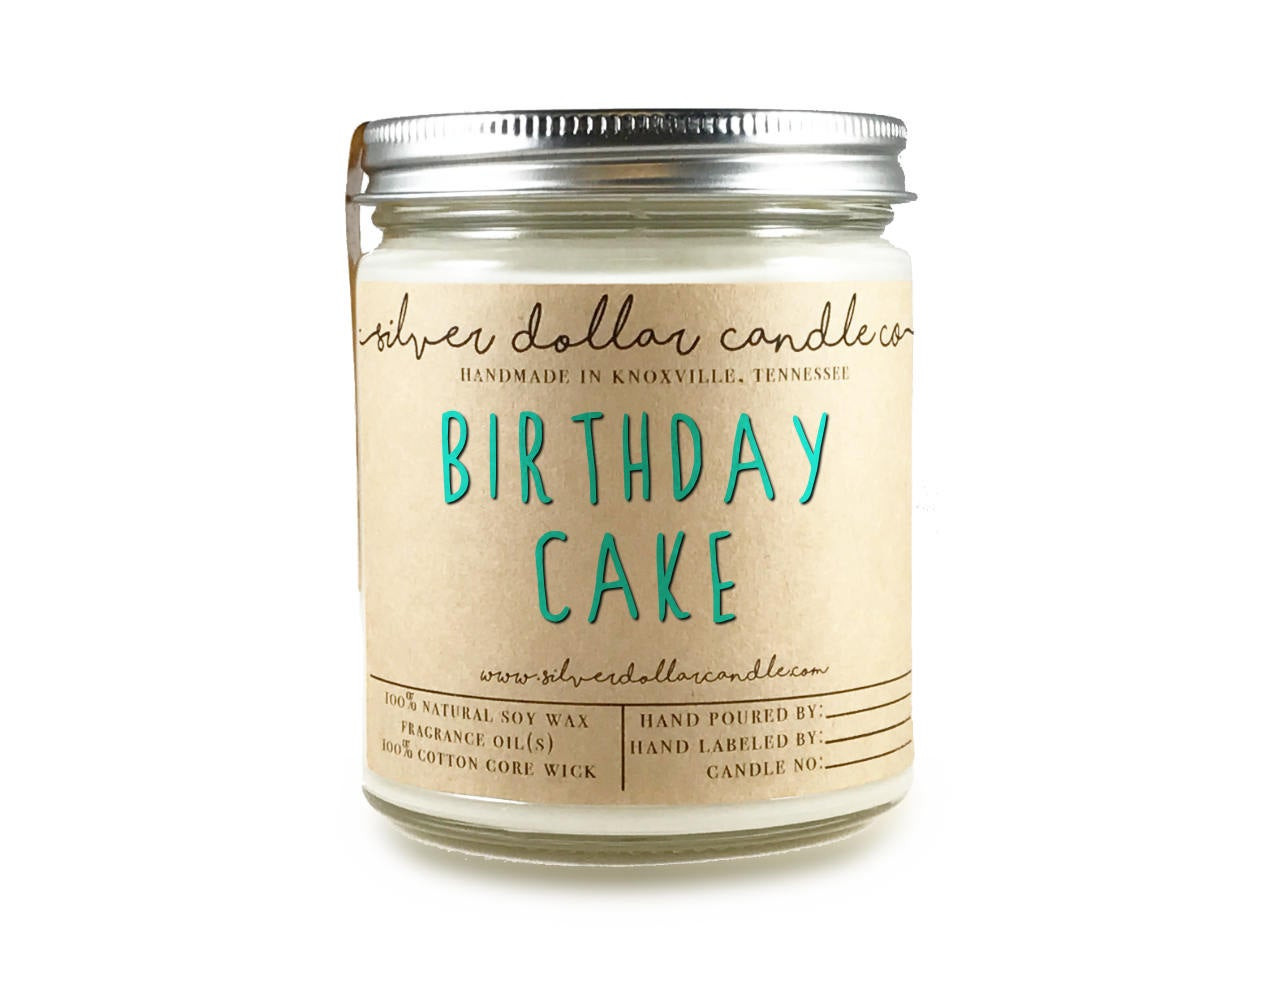 Birthday Cake Scented Candles
 Birthday Cake 8oz Scented Candle Hand poured Cake candle